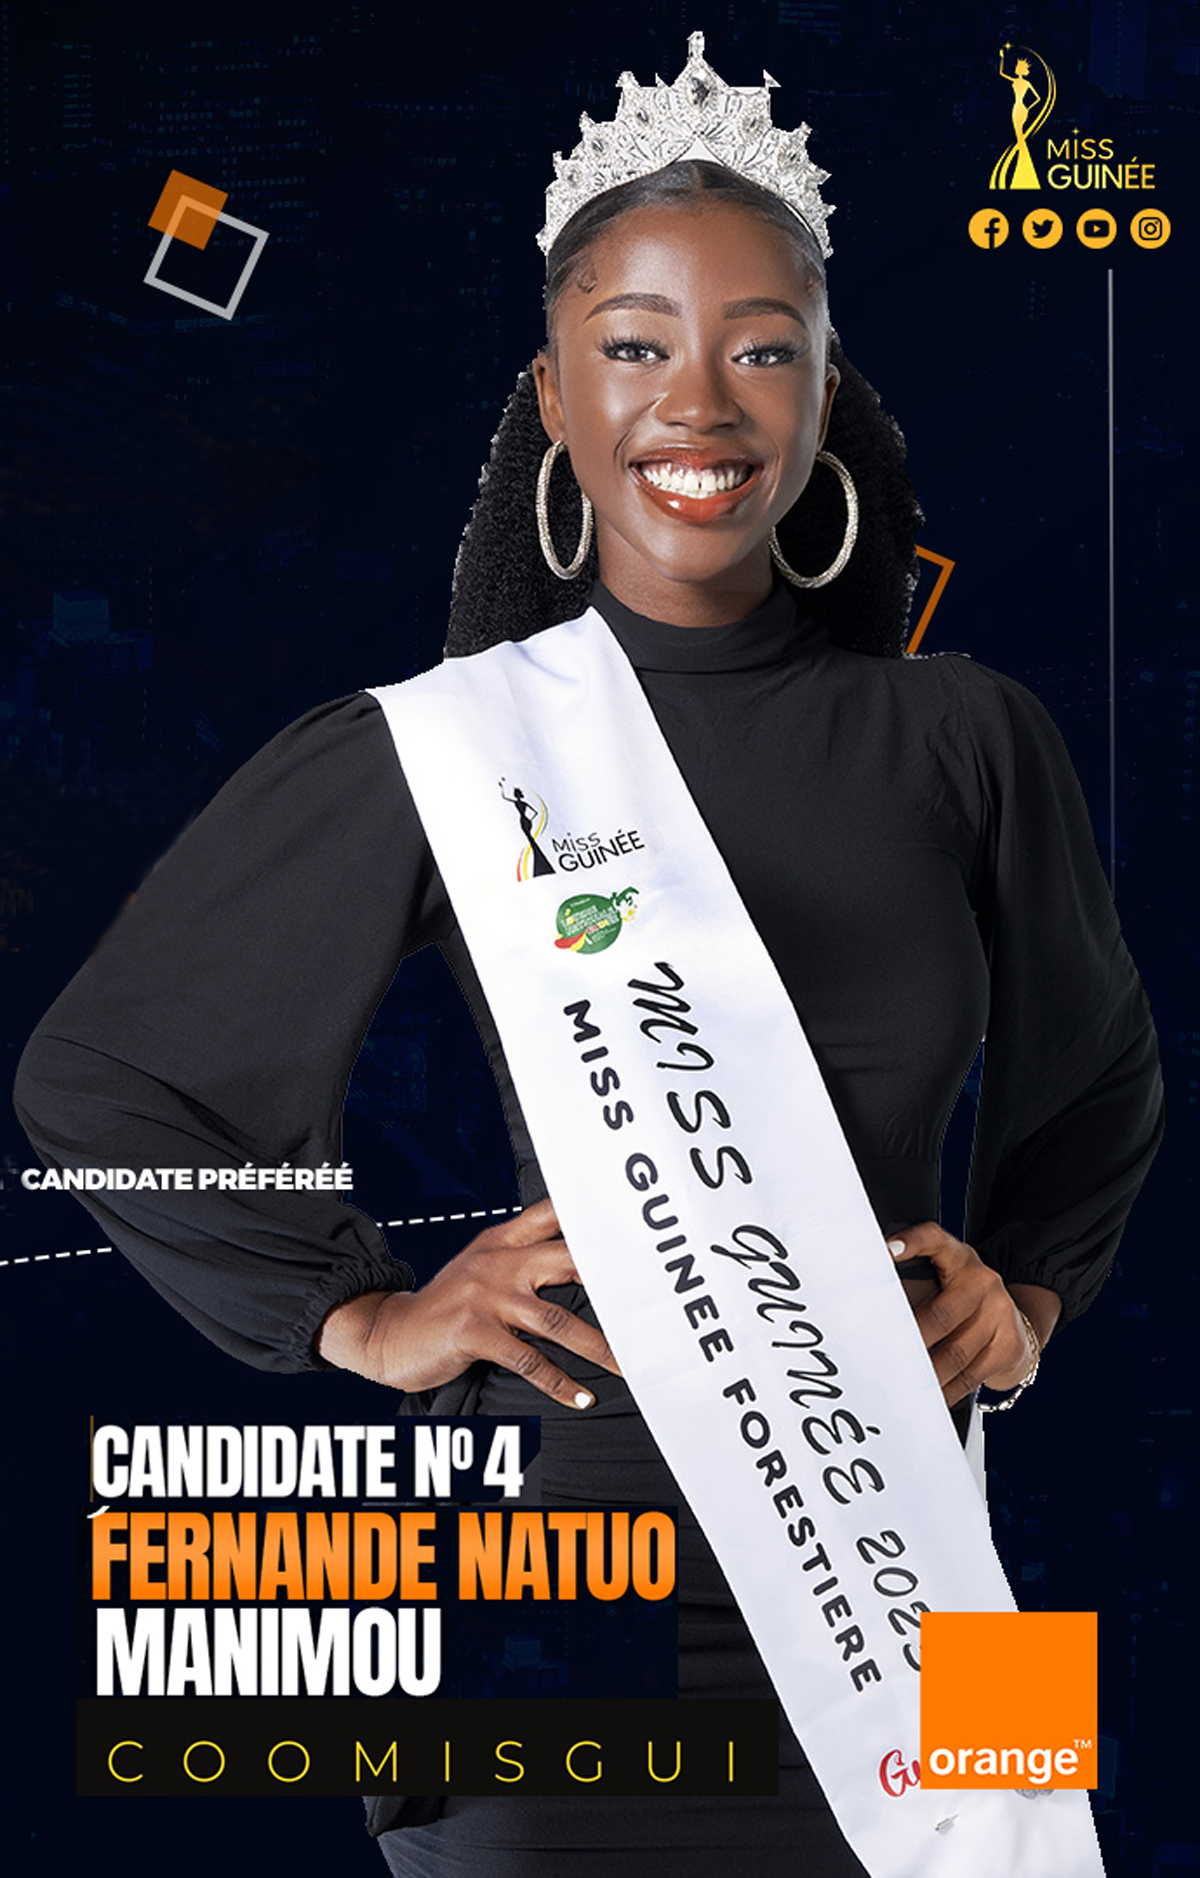 Miss-HADJA-KADIATOU-CONDE-Representing-Miss-CONAKRY-Miss-FERNANDE-NATUO-MANIMOU-CANDIDATE-Number-4 - DN-AFRICA MEDIA PARTNER